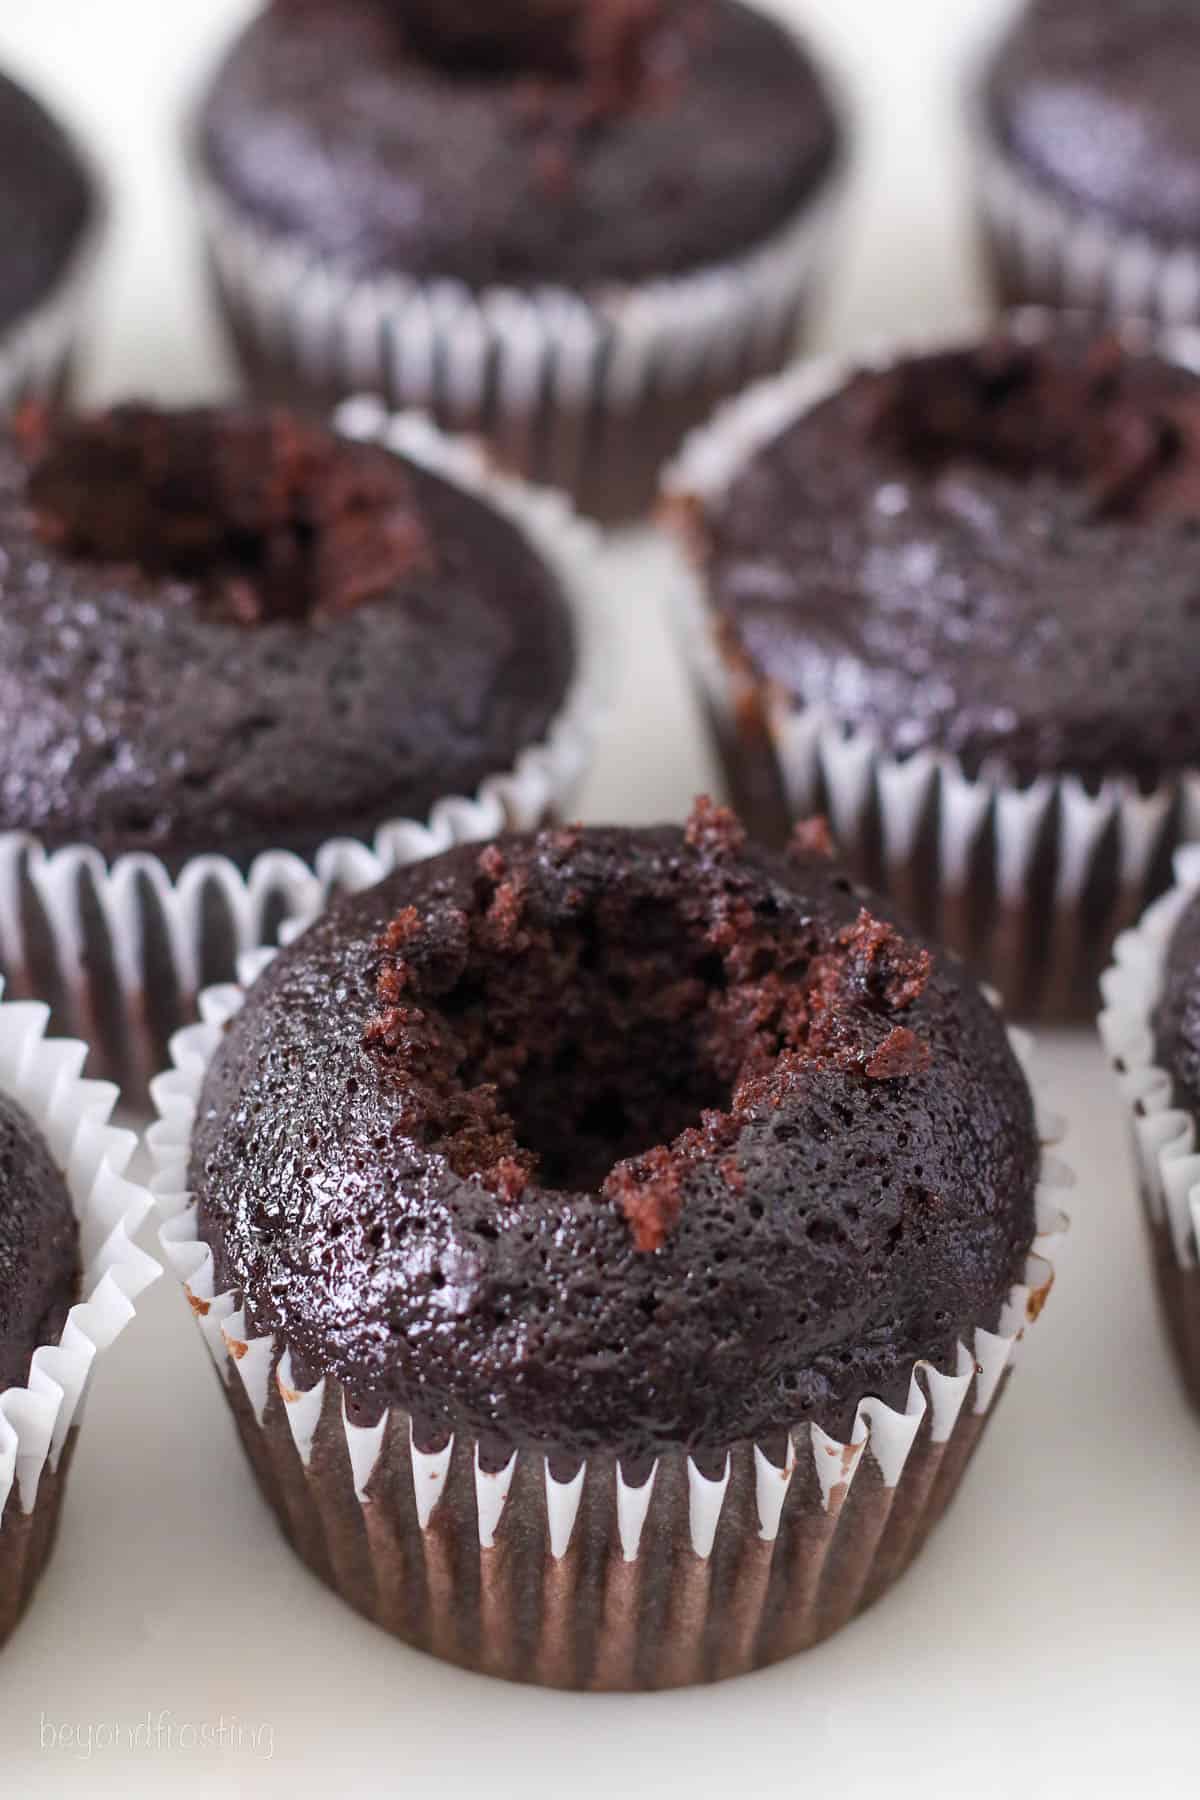 Chocolate cupcakes with their centers removed.